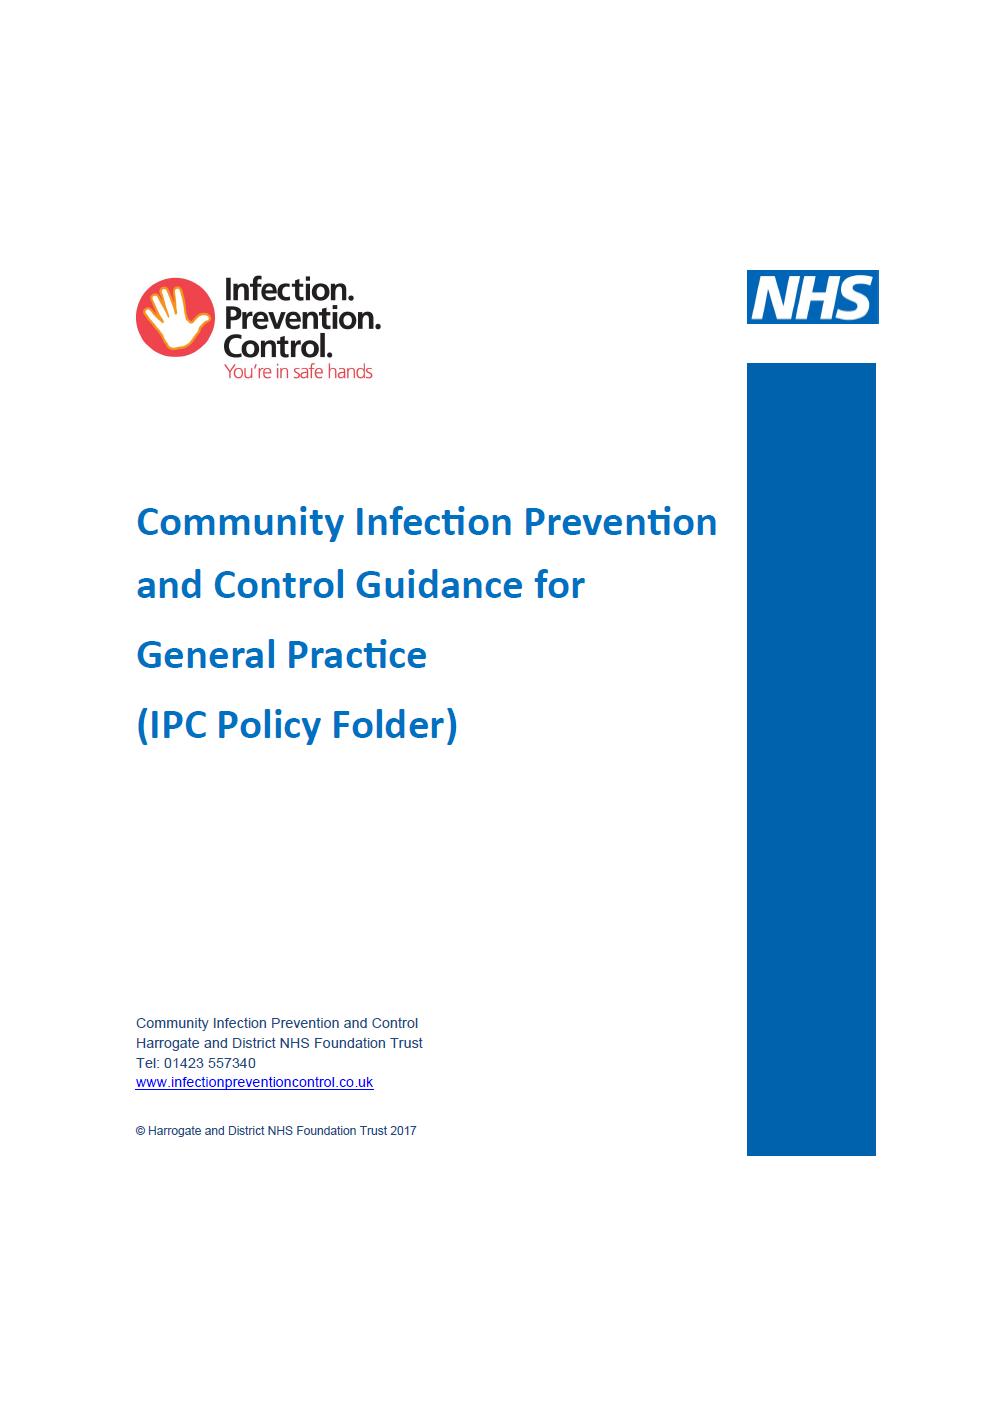 Community Infection Prevention and Control Guidance for General Practice (IPC Policy folder) Objective: We have produced a comprehensive range of guidance documents which can be adopted as policies,